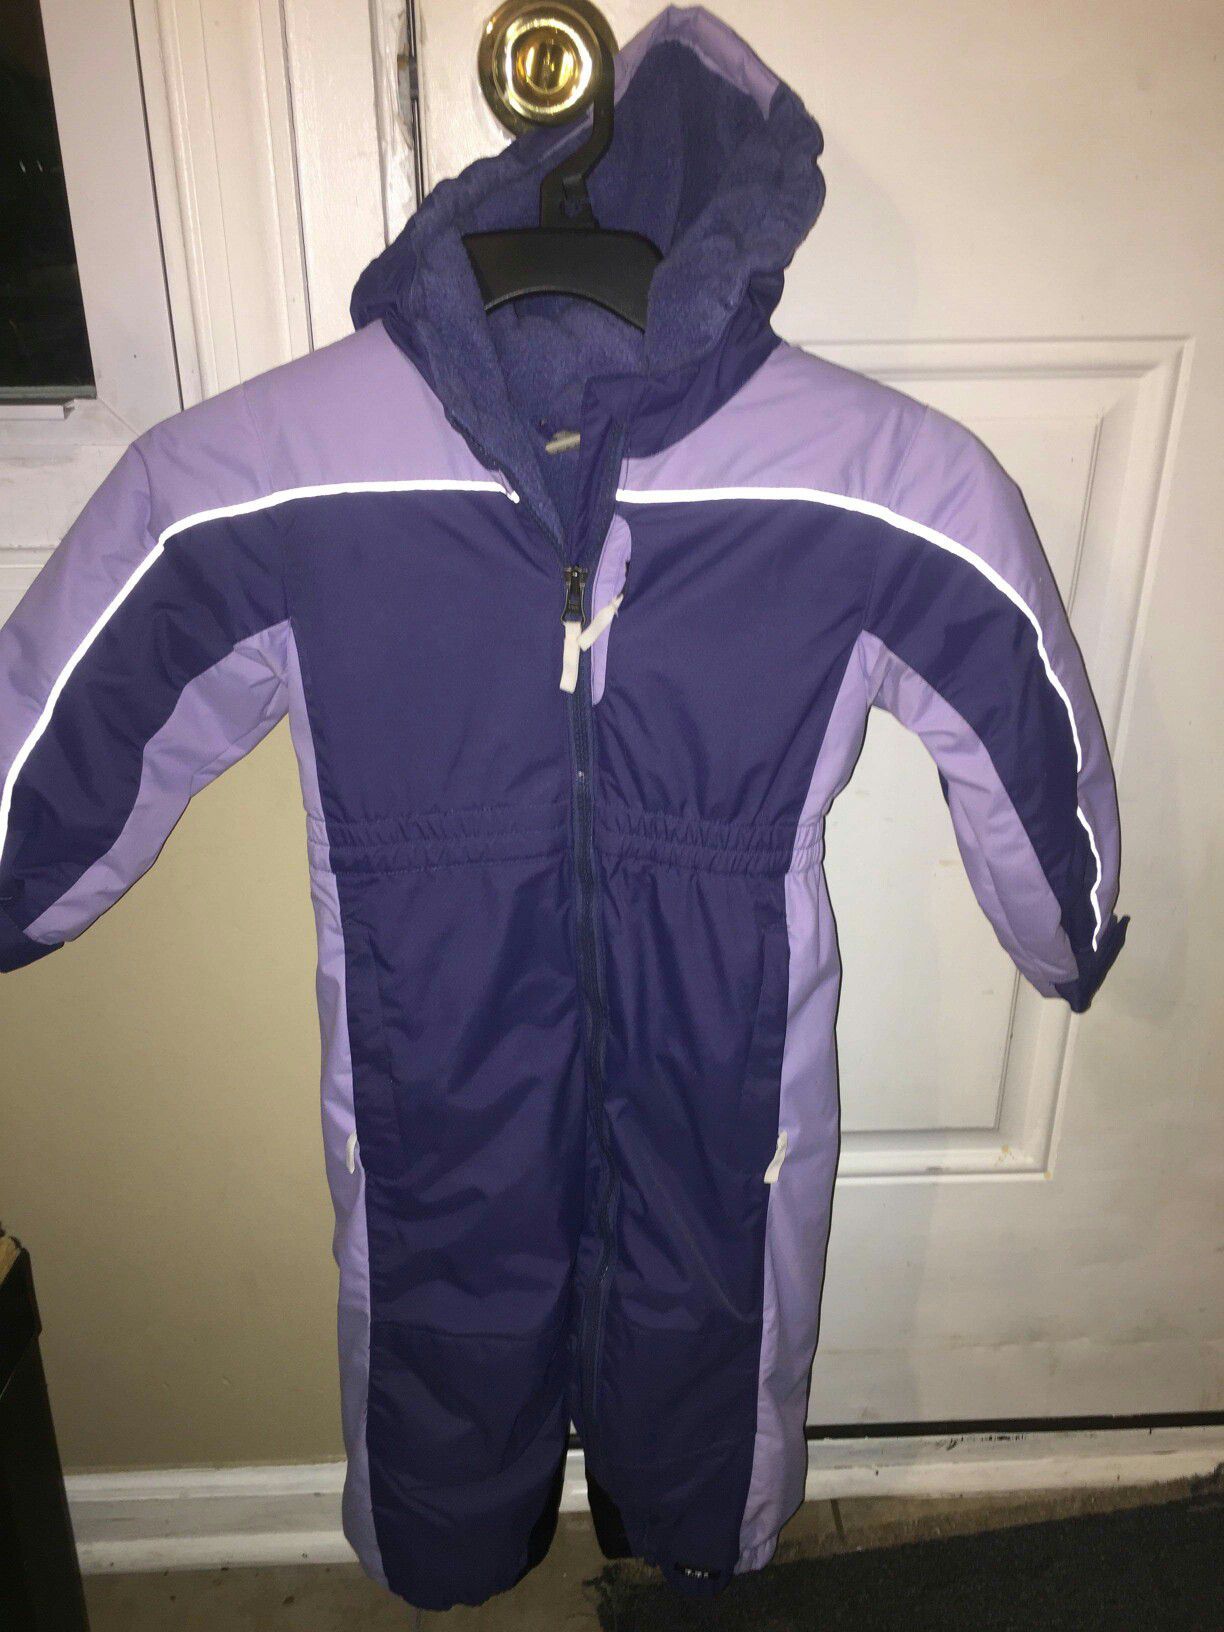 Girls double layered snow suit size 2 t